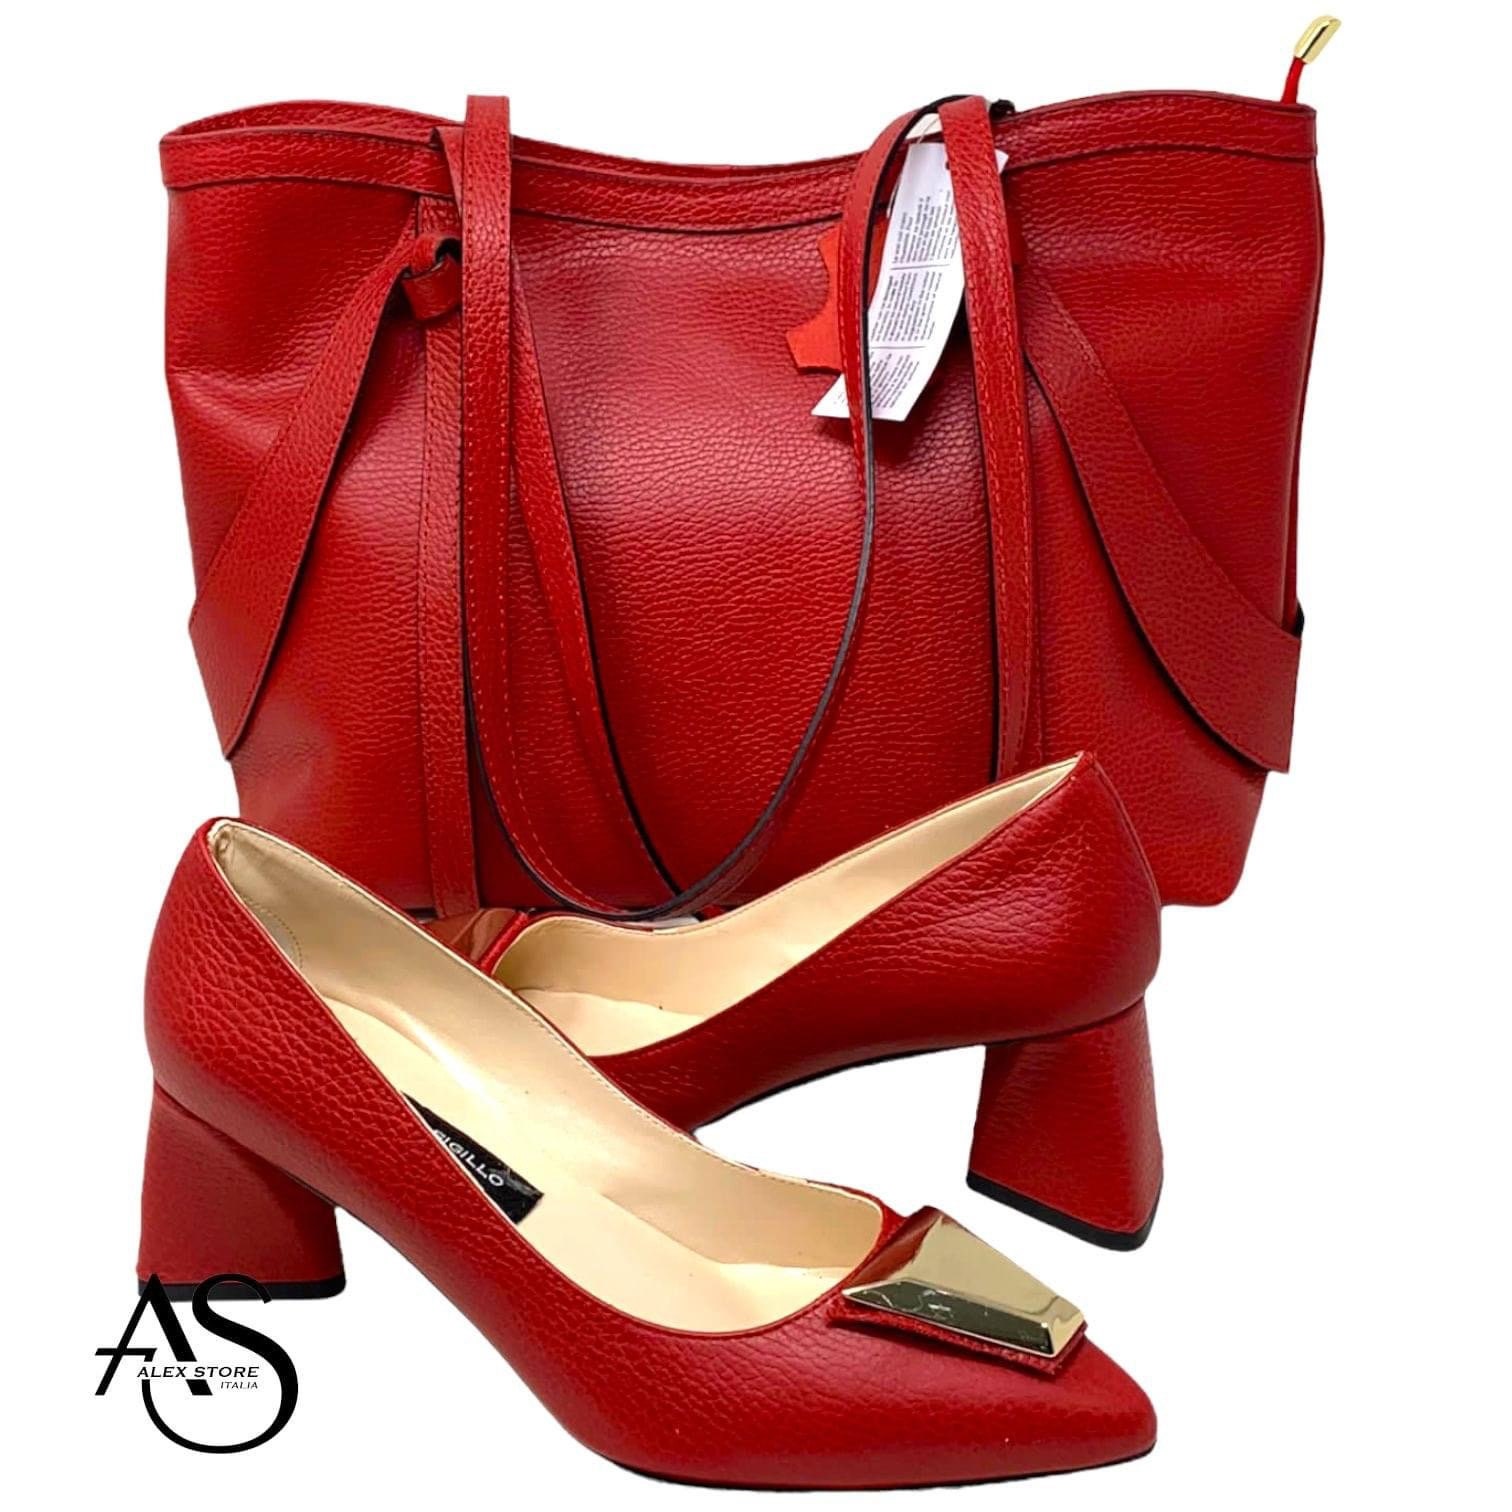 Women Shoes and Bag Set 